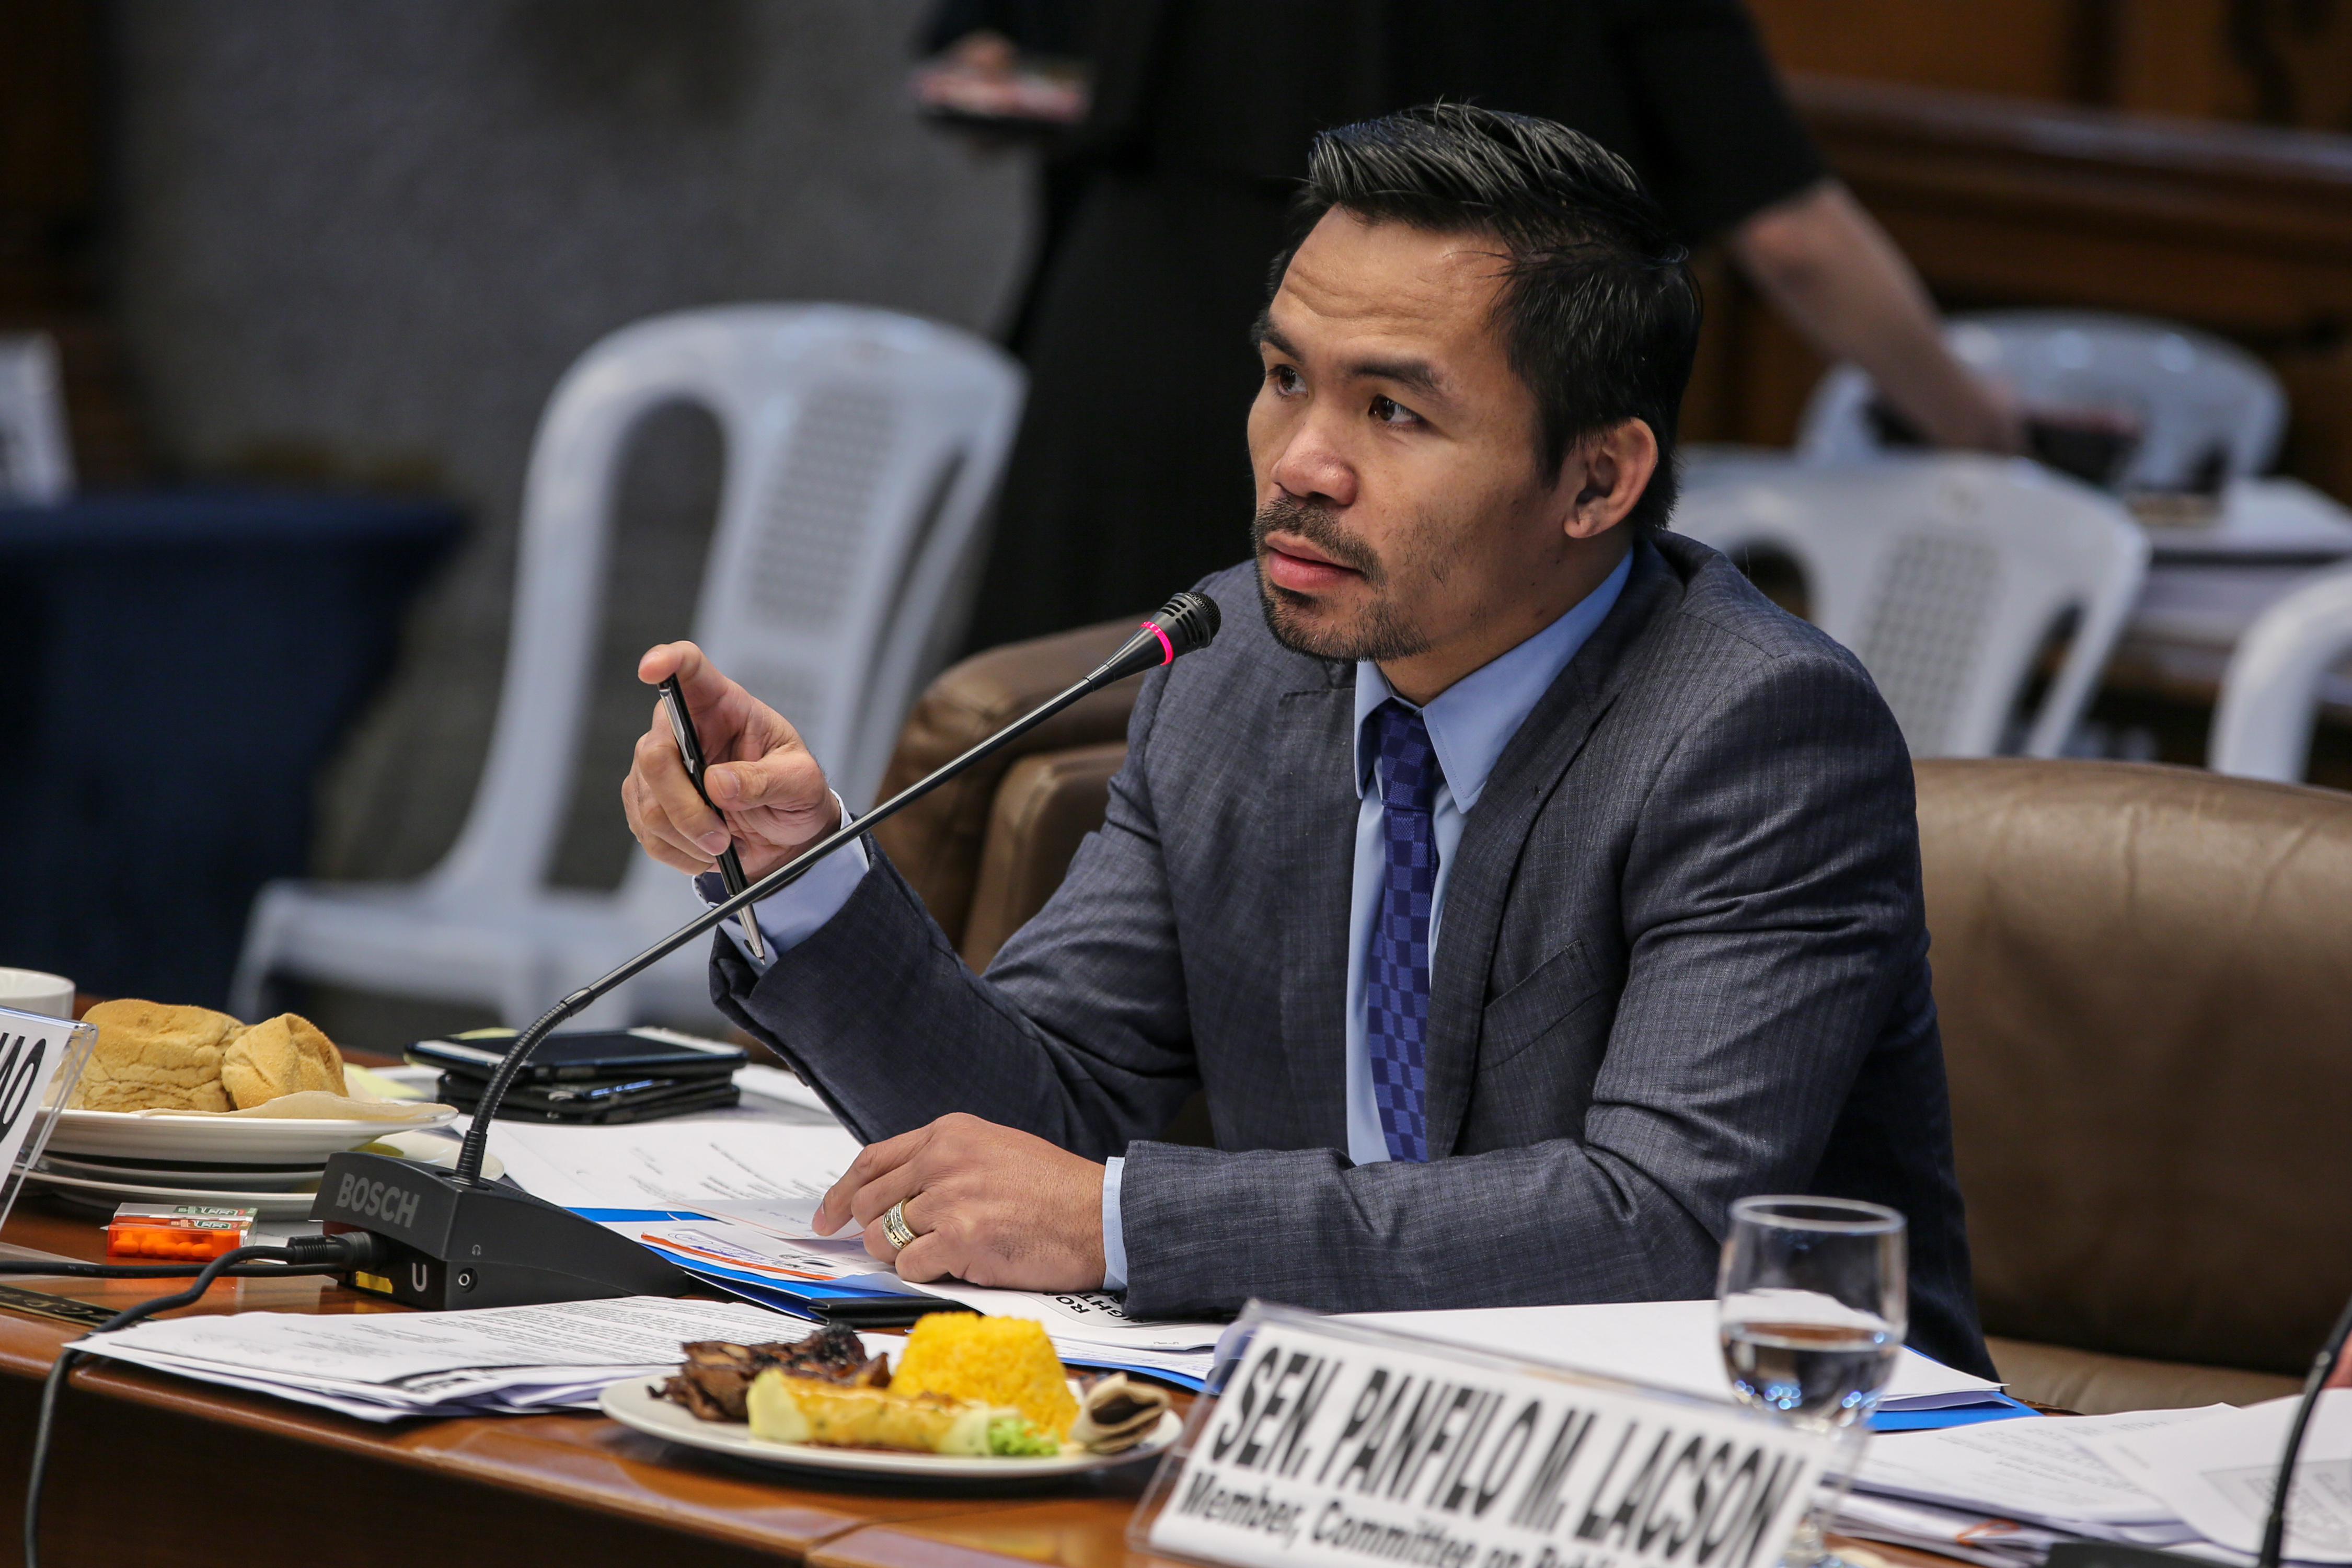 Senator Manny Pacquiao at the Senate inquiry on DPWH projects, December 11, 2017. Jonathan Cellona, ABS-CBN News